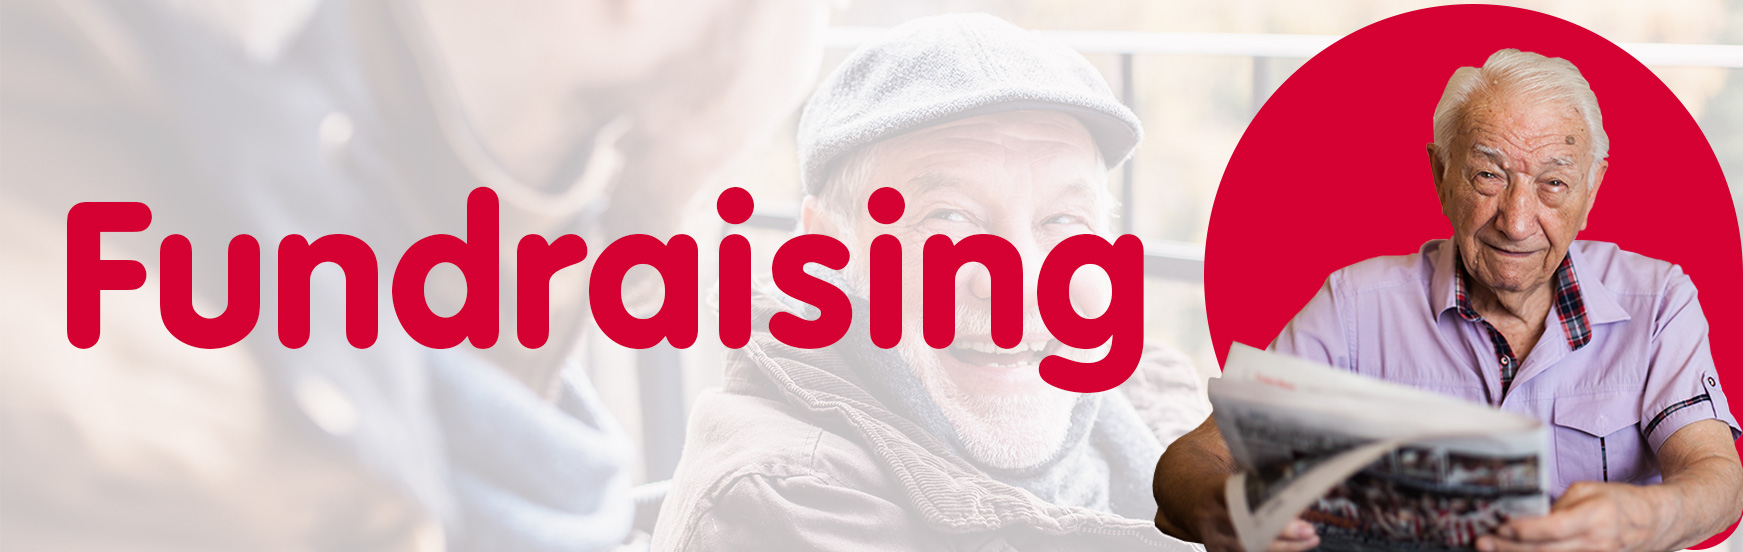 age connects fundraising